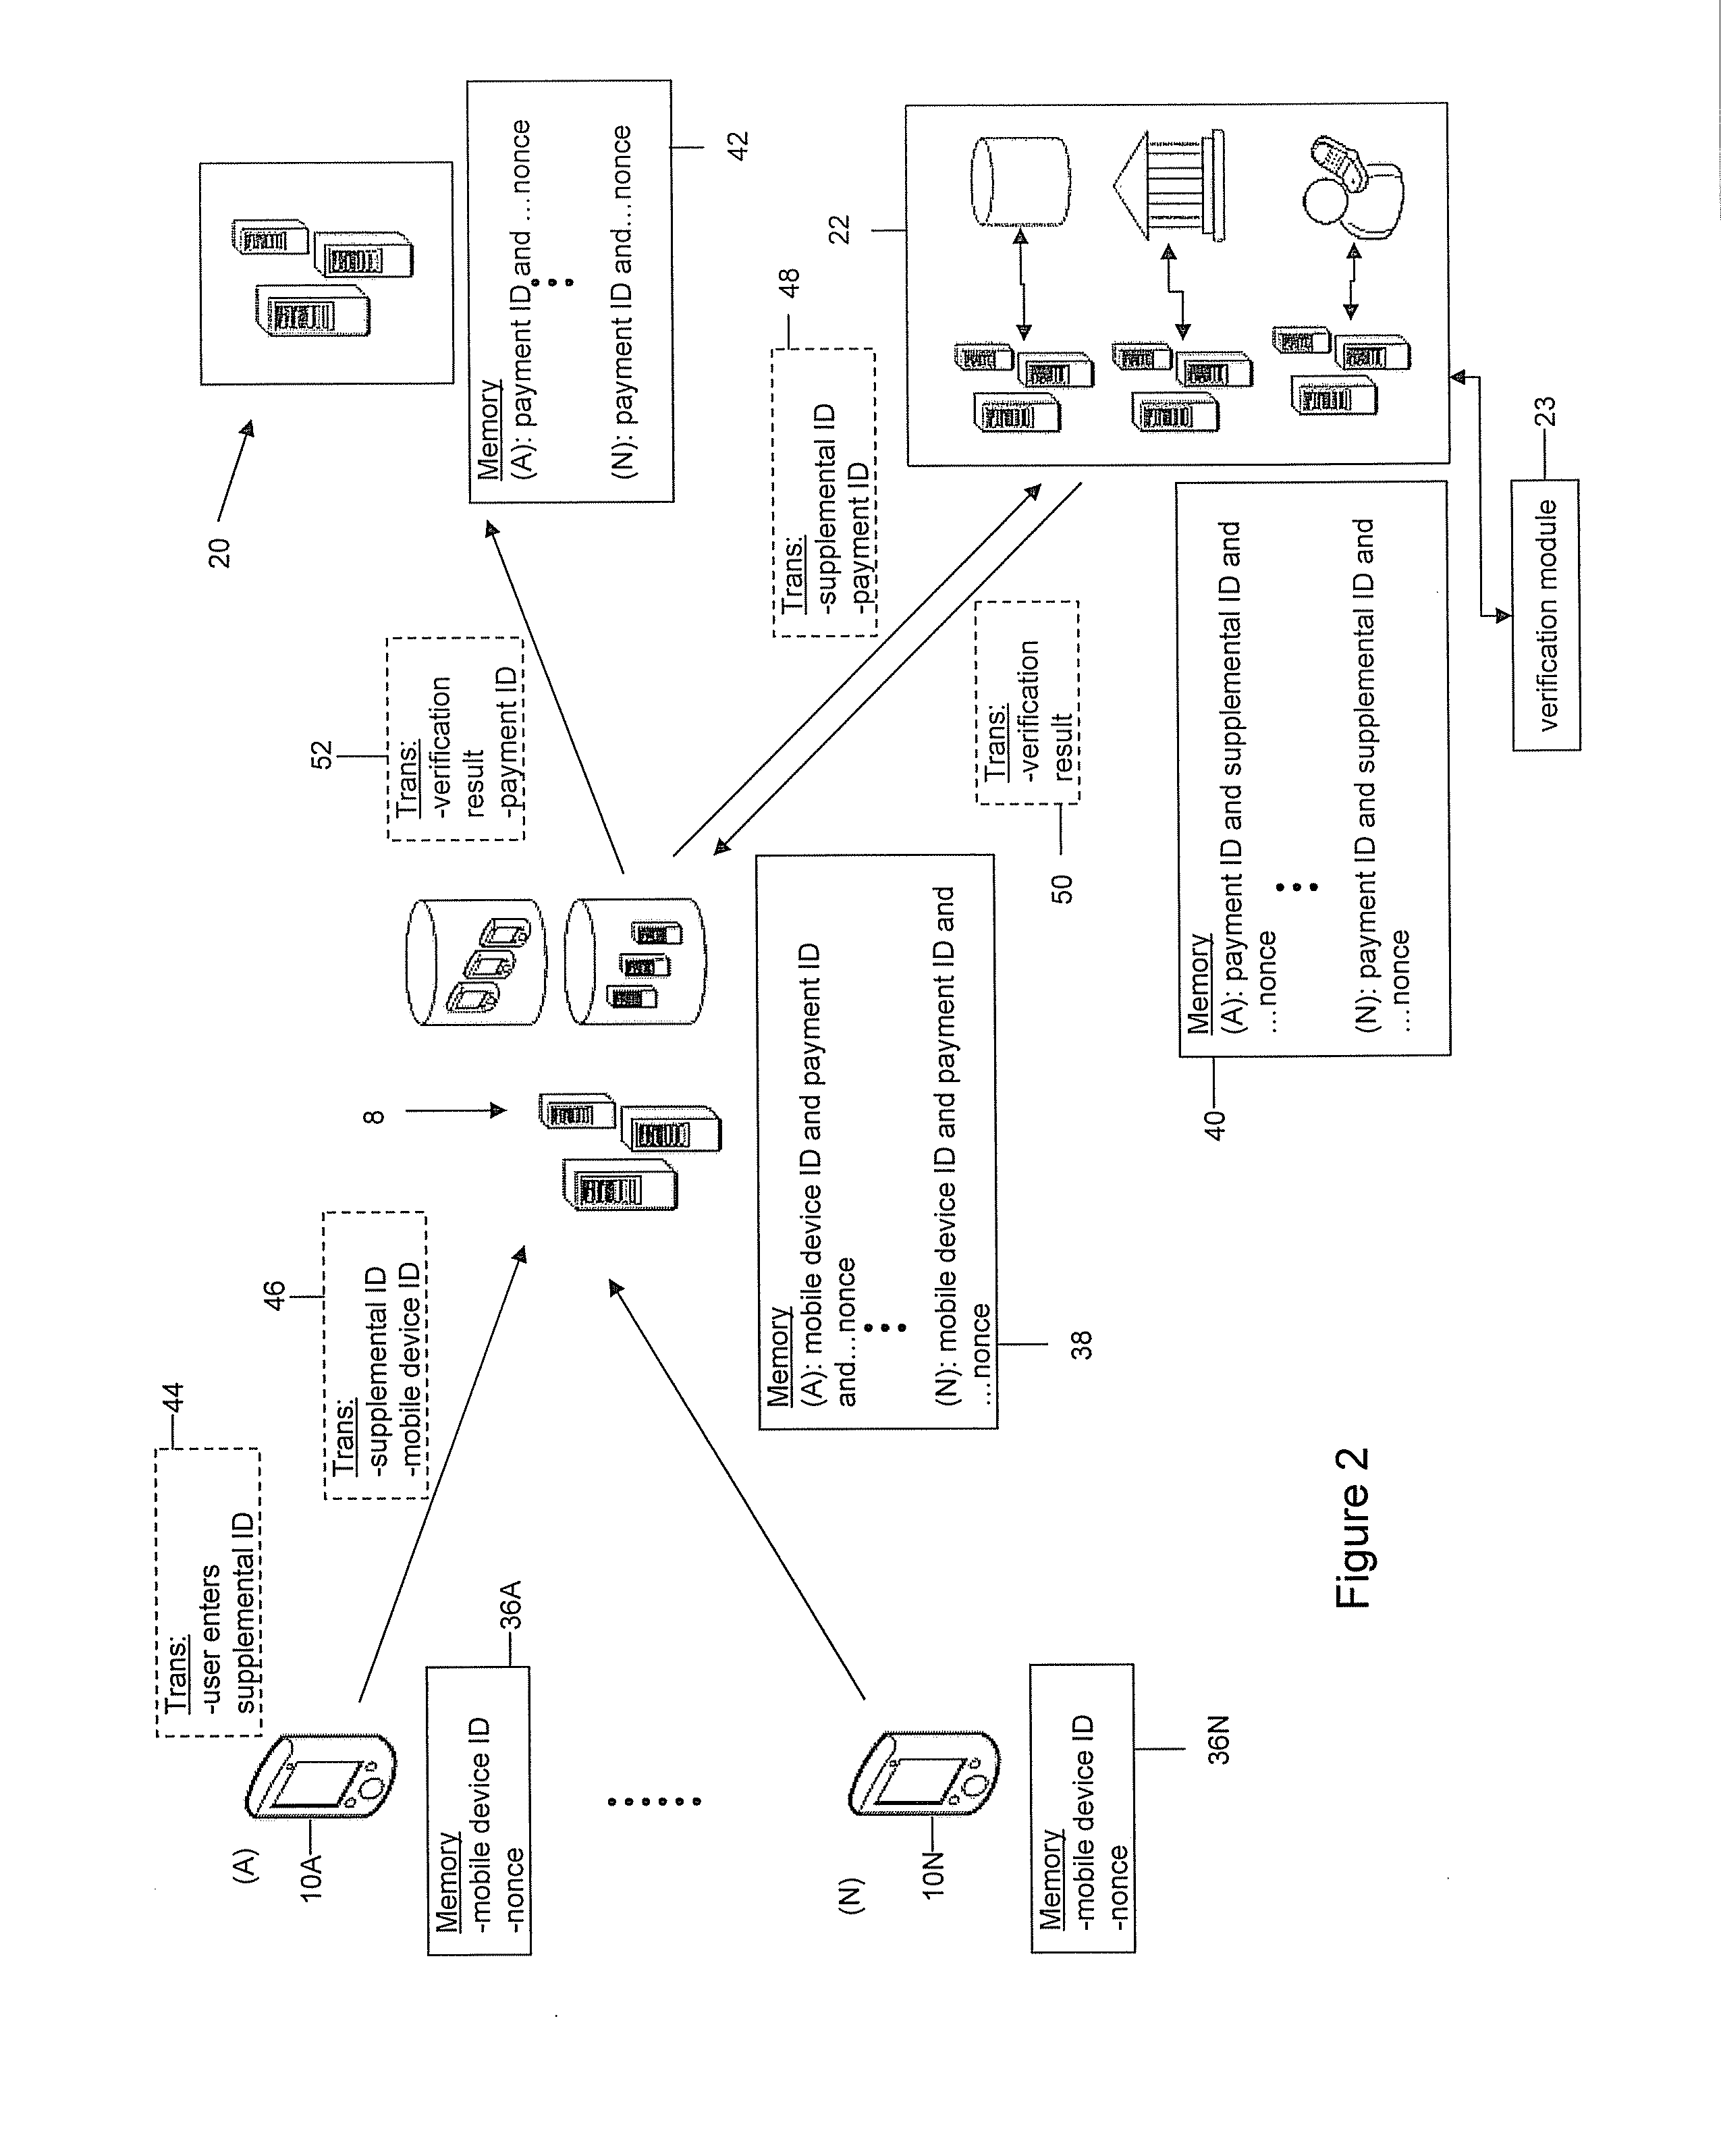 System and Method for Authenticating Transactions Through a Mobile Device